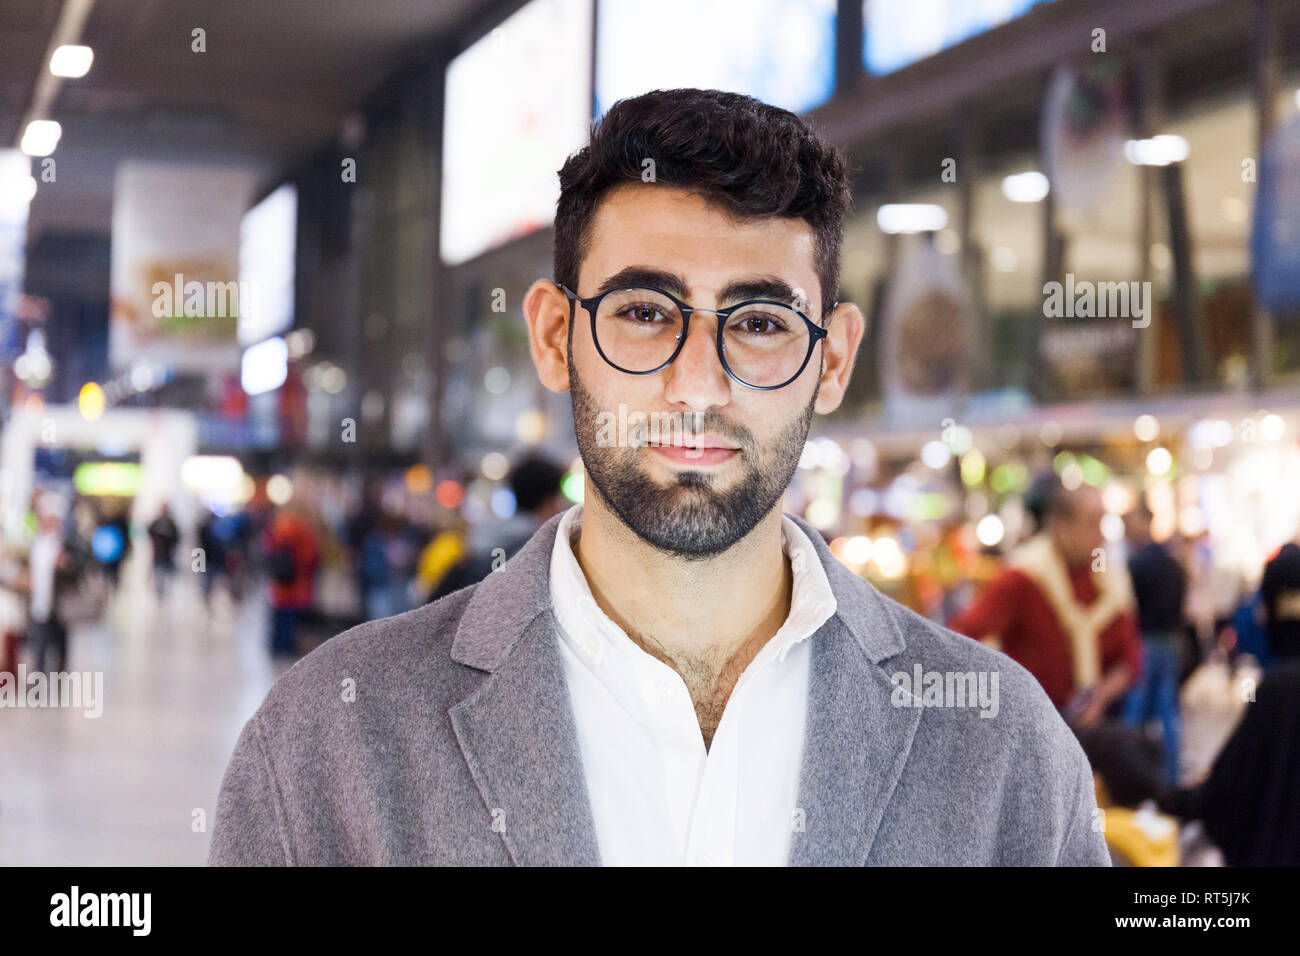 Germany, Munich, portrait of young businessman at central station Stock Photo